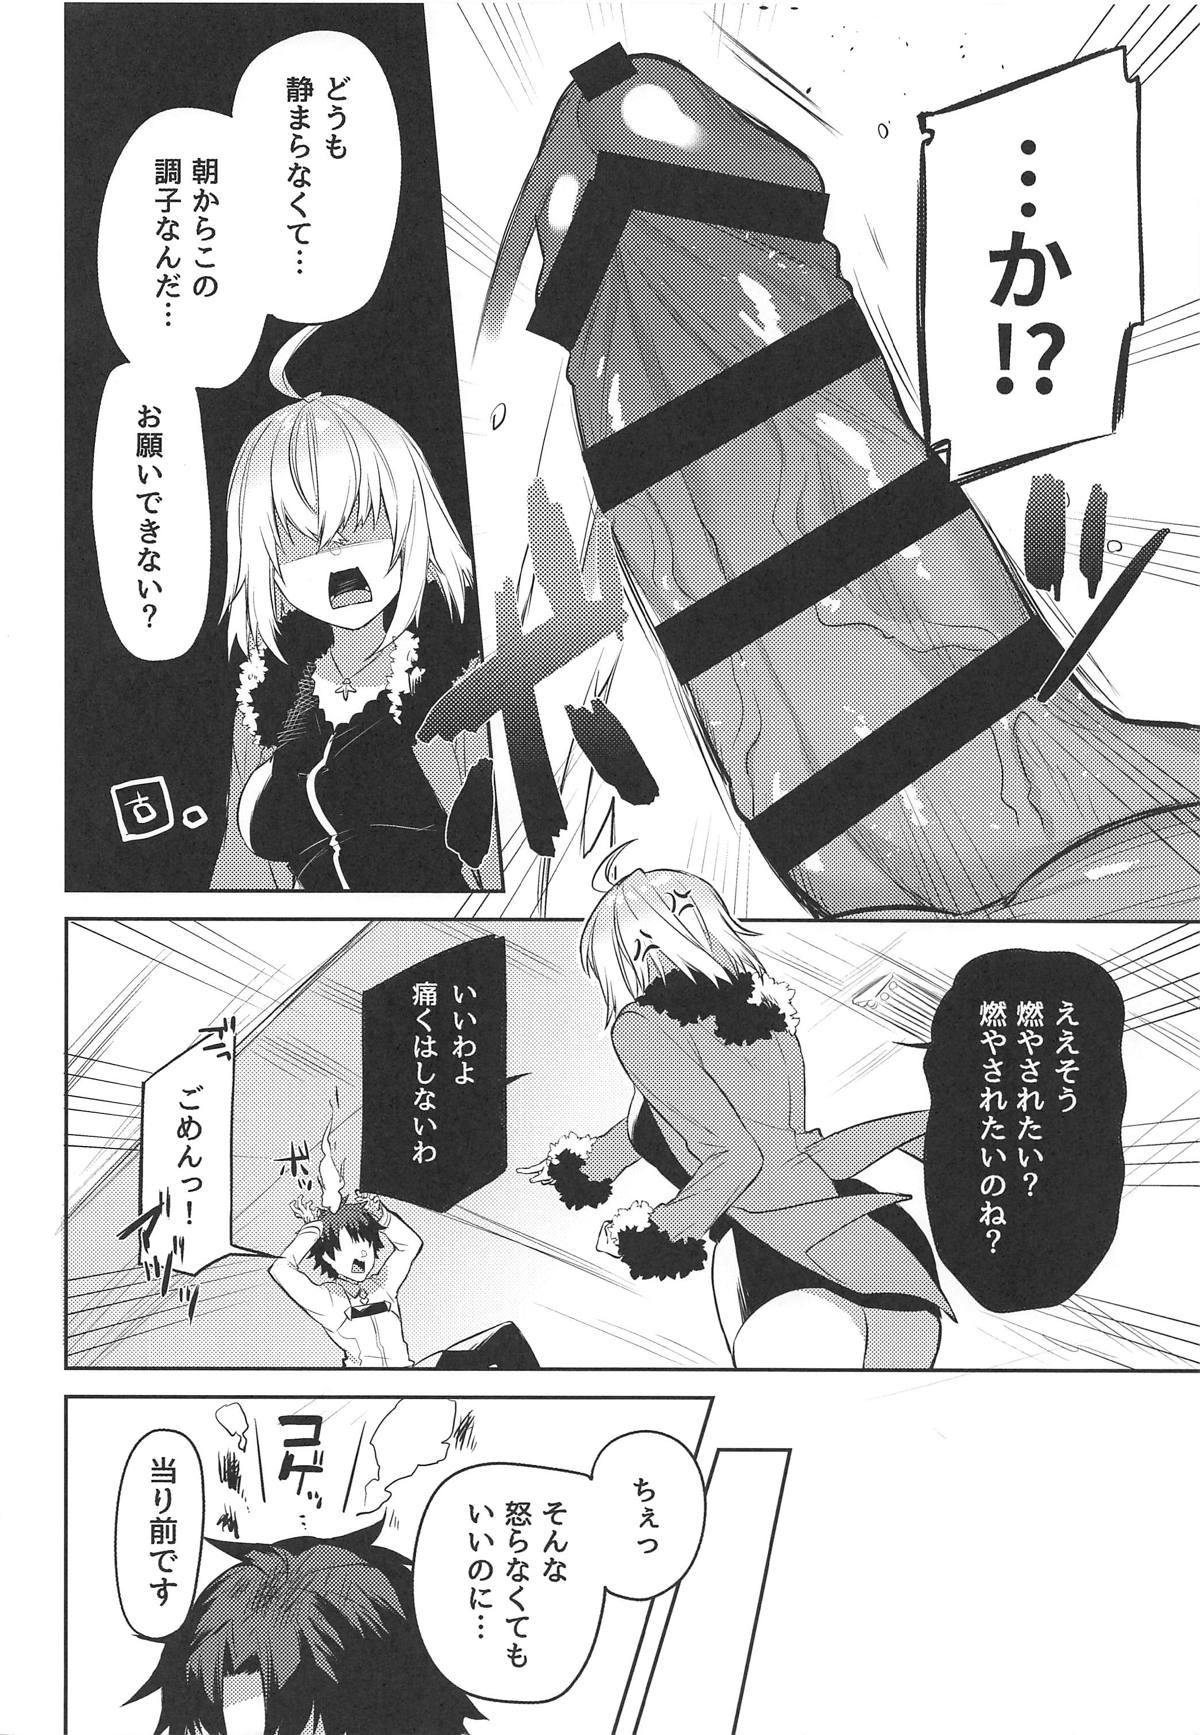 Sex Tape Shinjuku Sneaking Mission - Fate grand order Amateurs Gone - Page 3